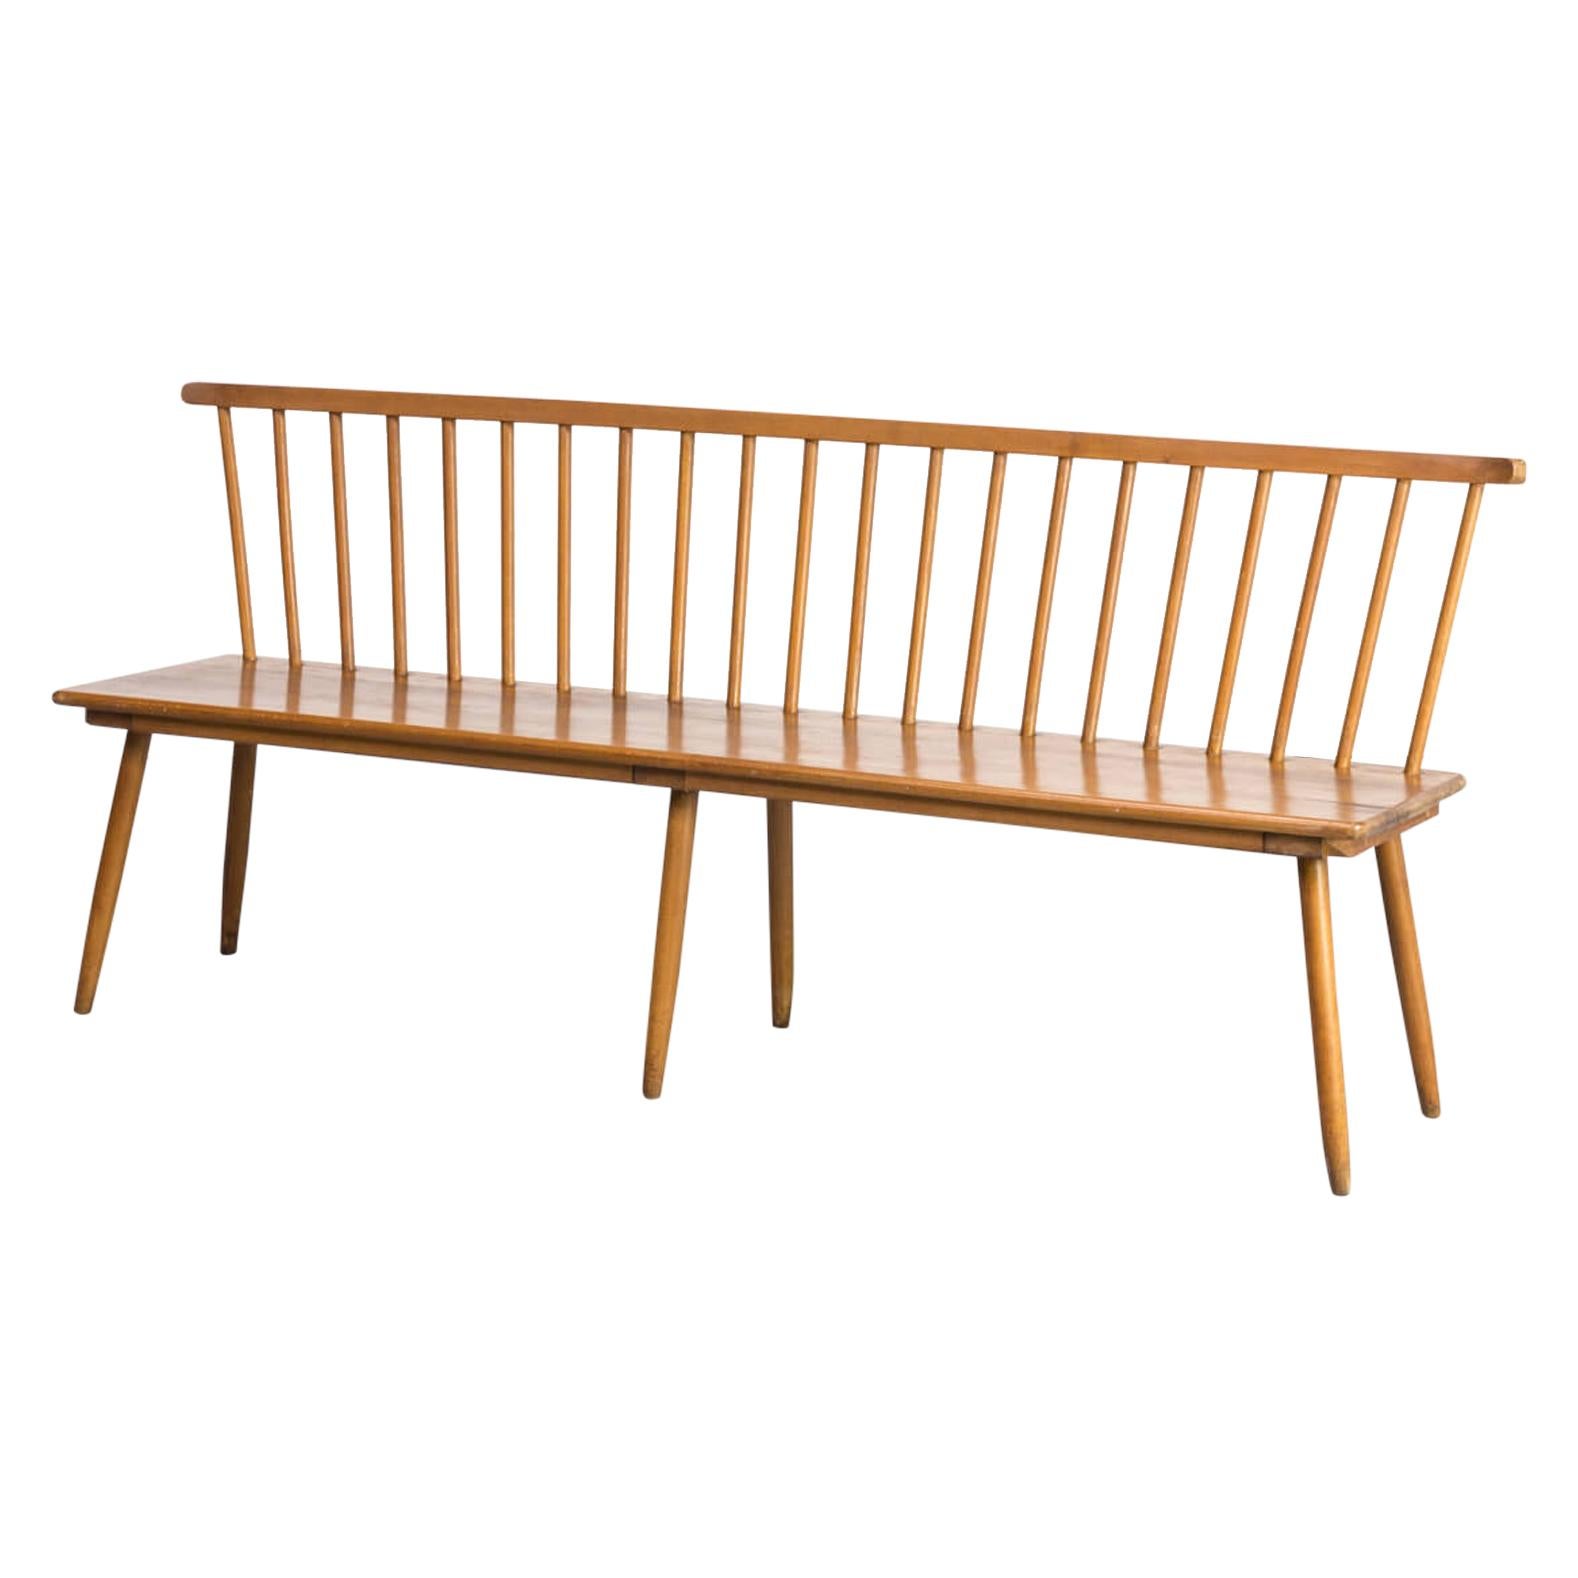 1960s wooden Bench for Bund For Sale